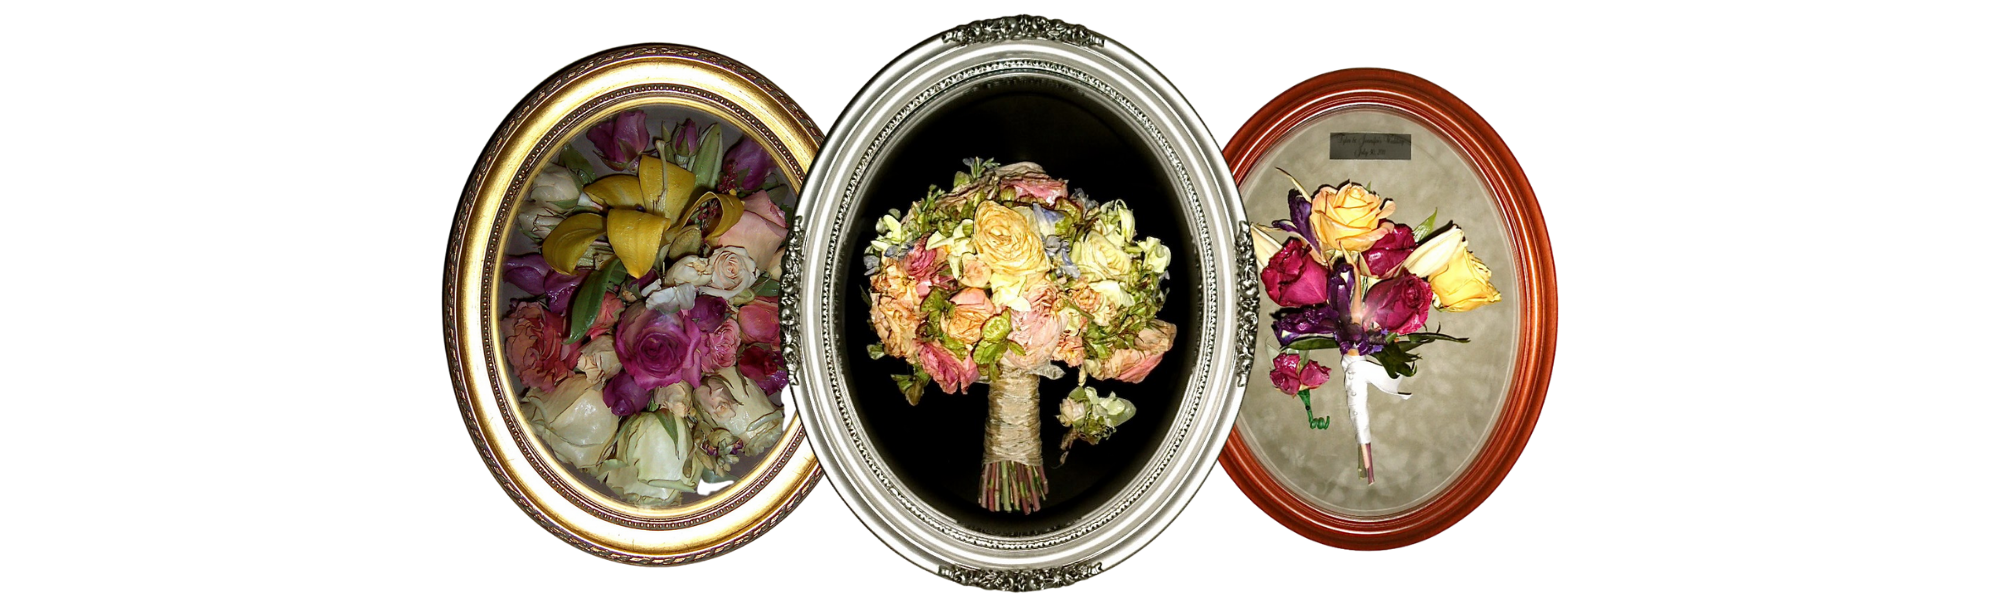 three beautiful preserved wedding bouquets in oval frames 